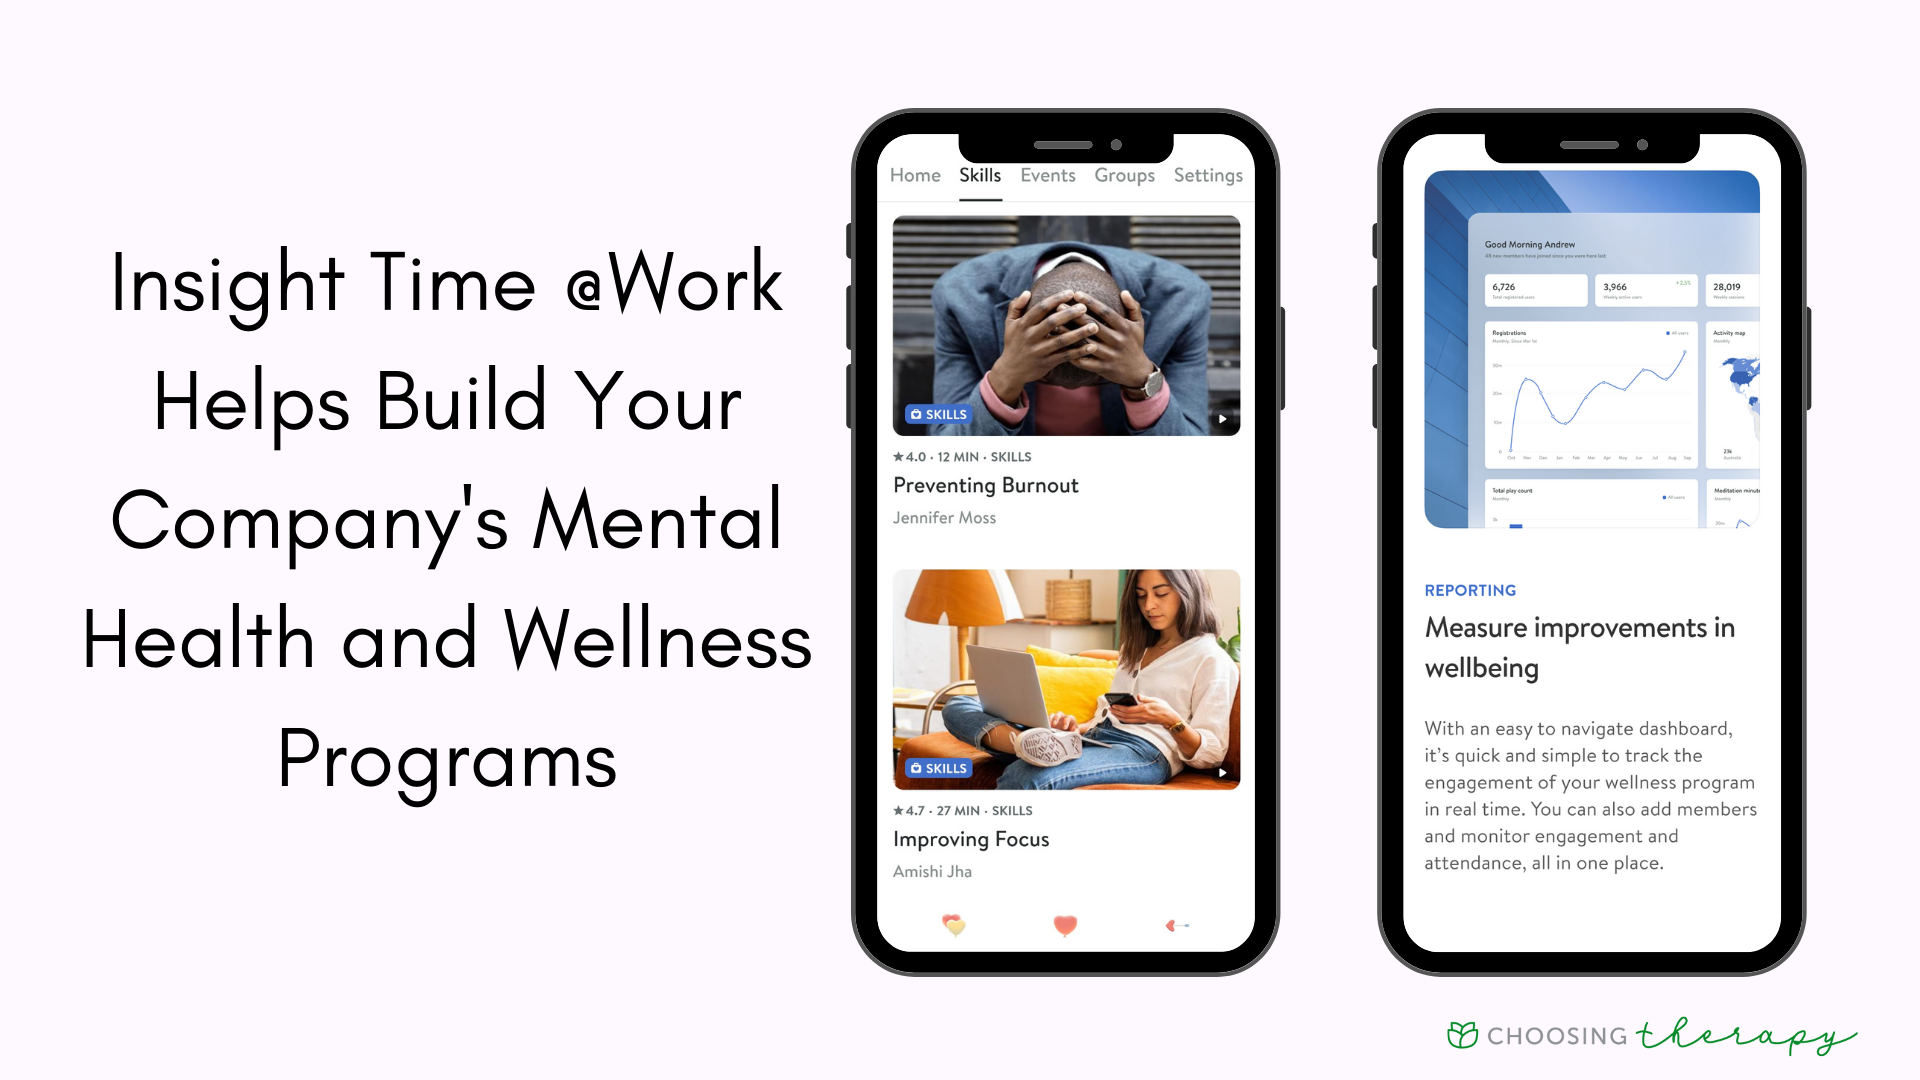 Insight Timer App Review 2022 - Image of Insight Timer at Work program for companies to help their employees mental health and wellness